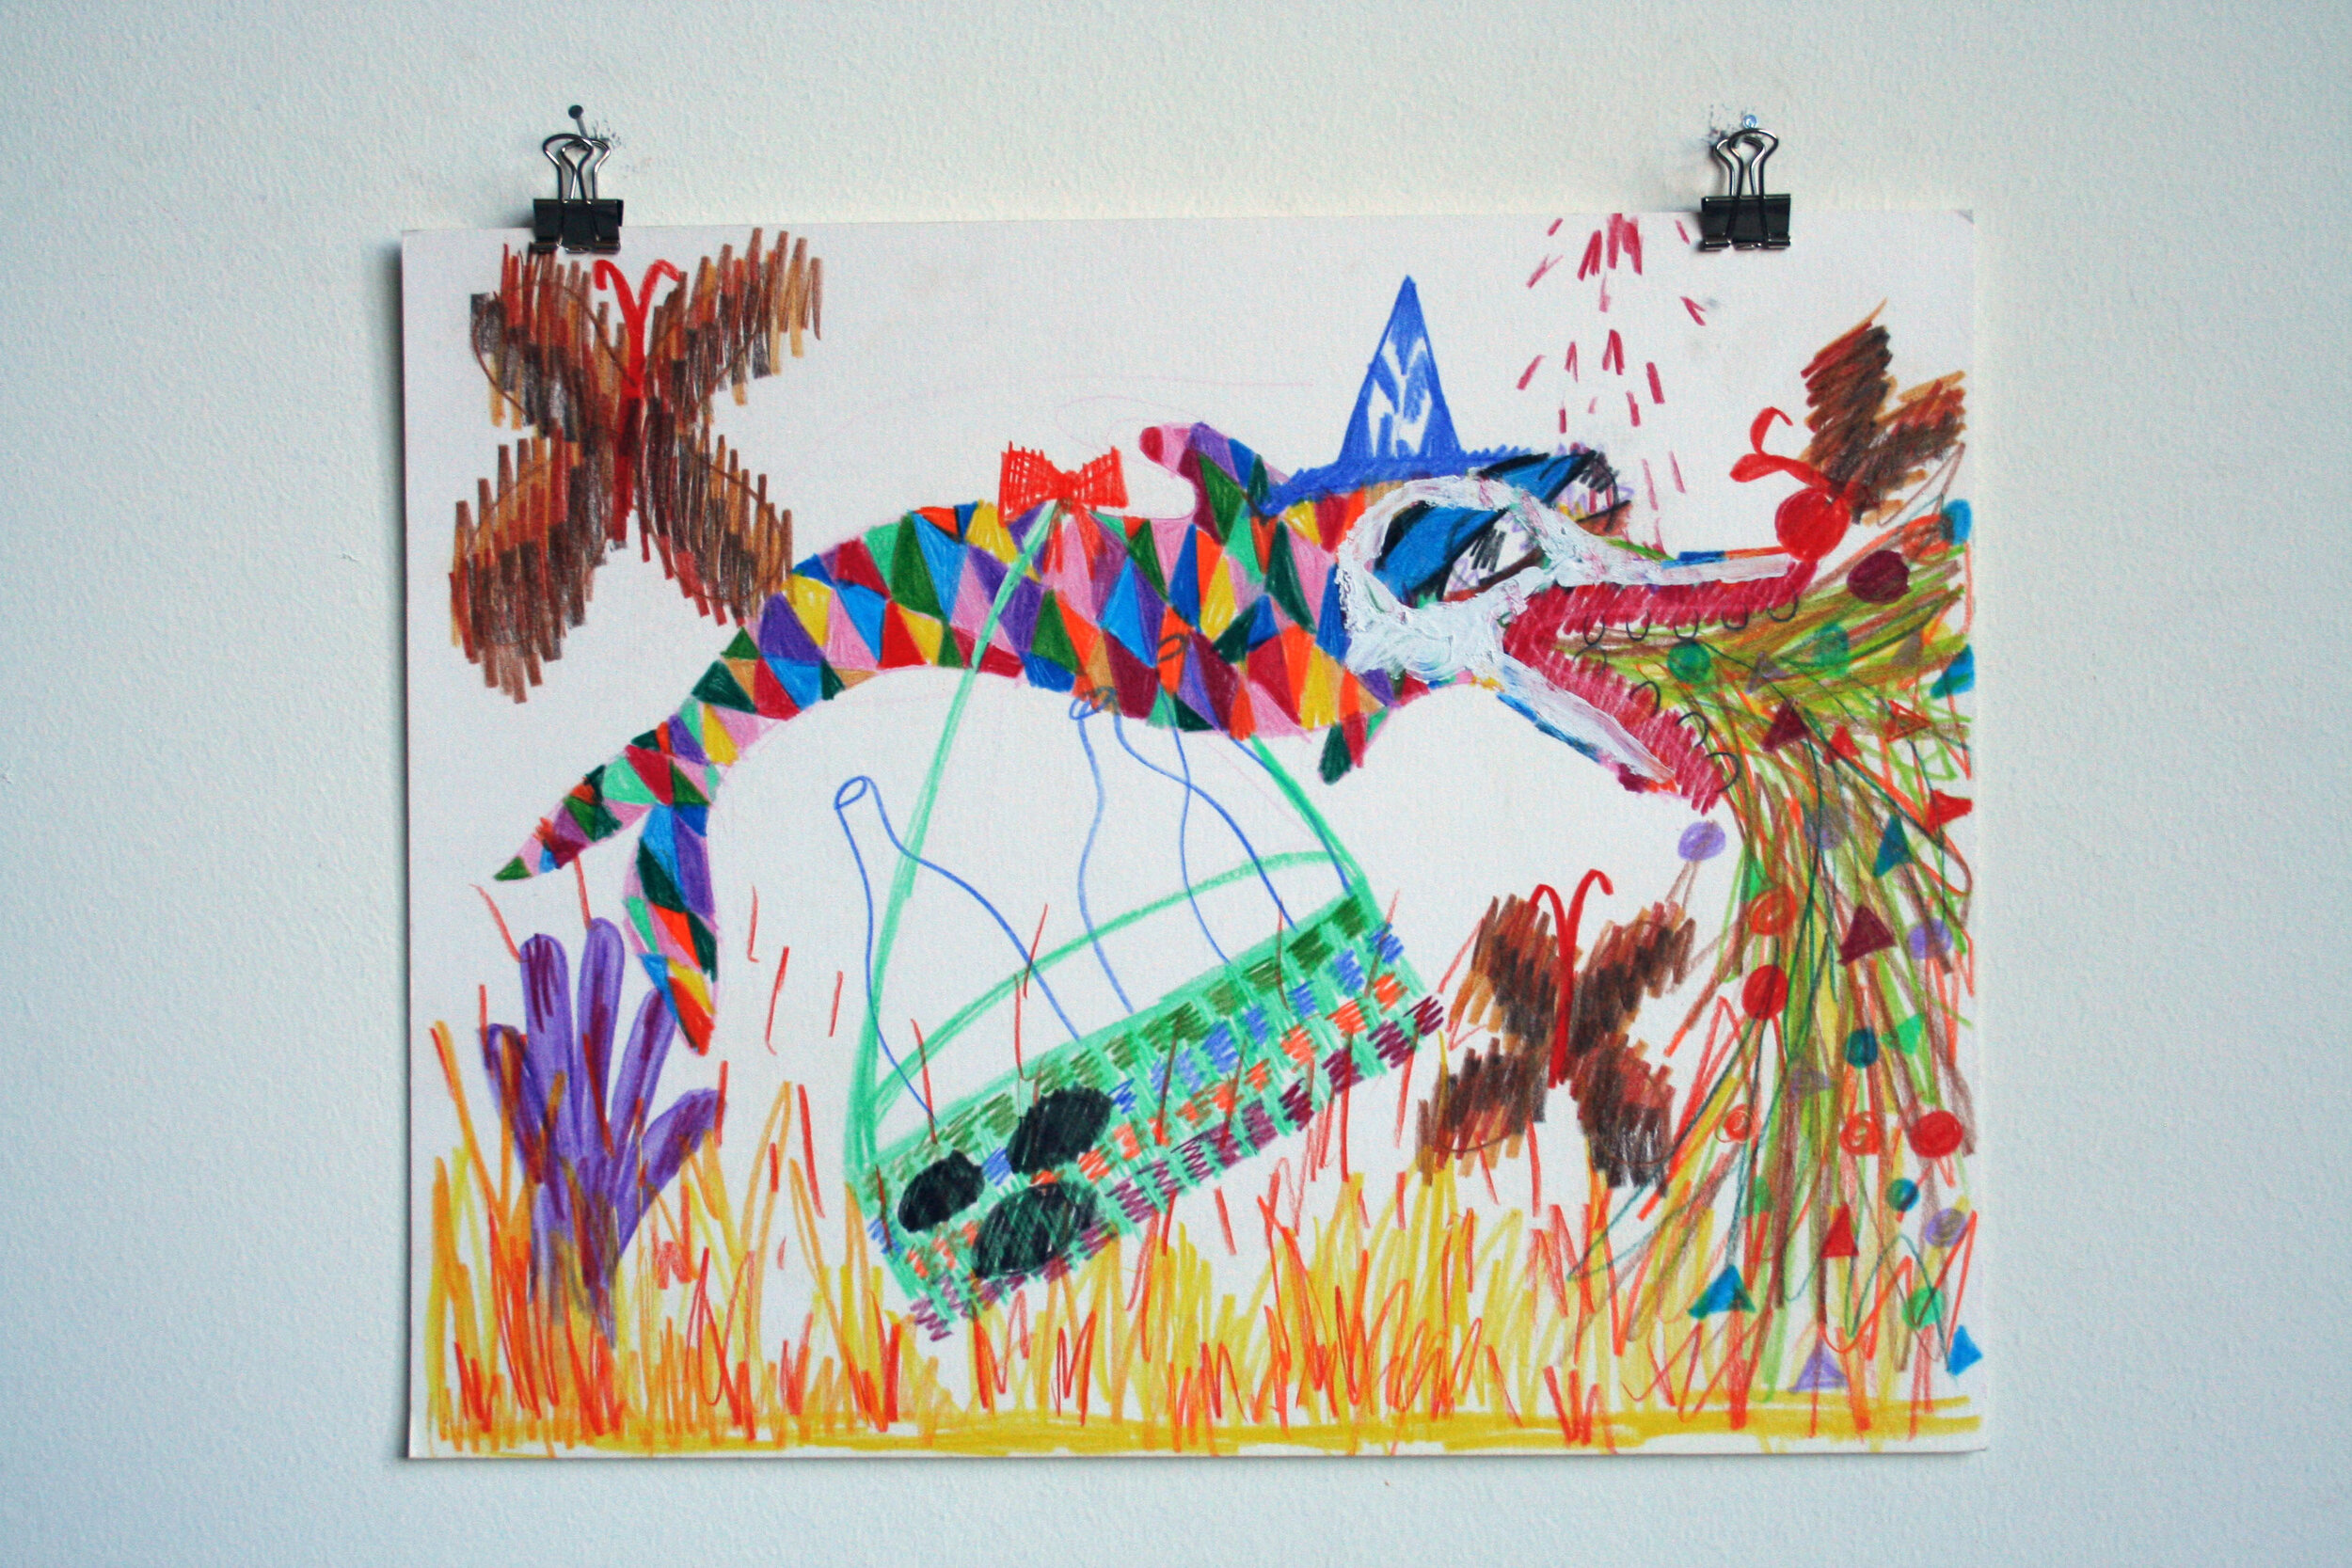   Can a Basket Be a Mask? , 2013  11 x 14 inches (27.94 x 35.56 cm.)  Colored pencil on paper 